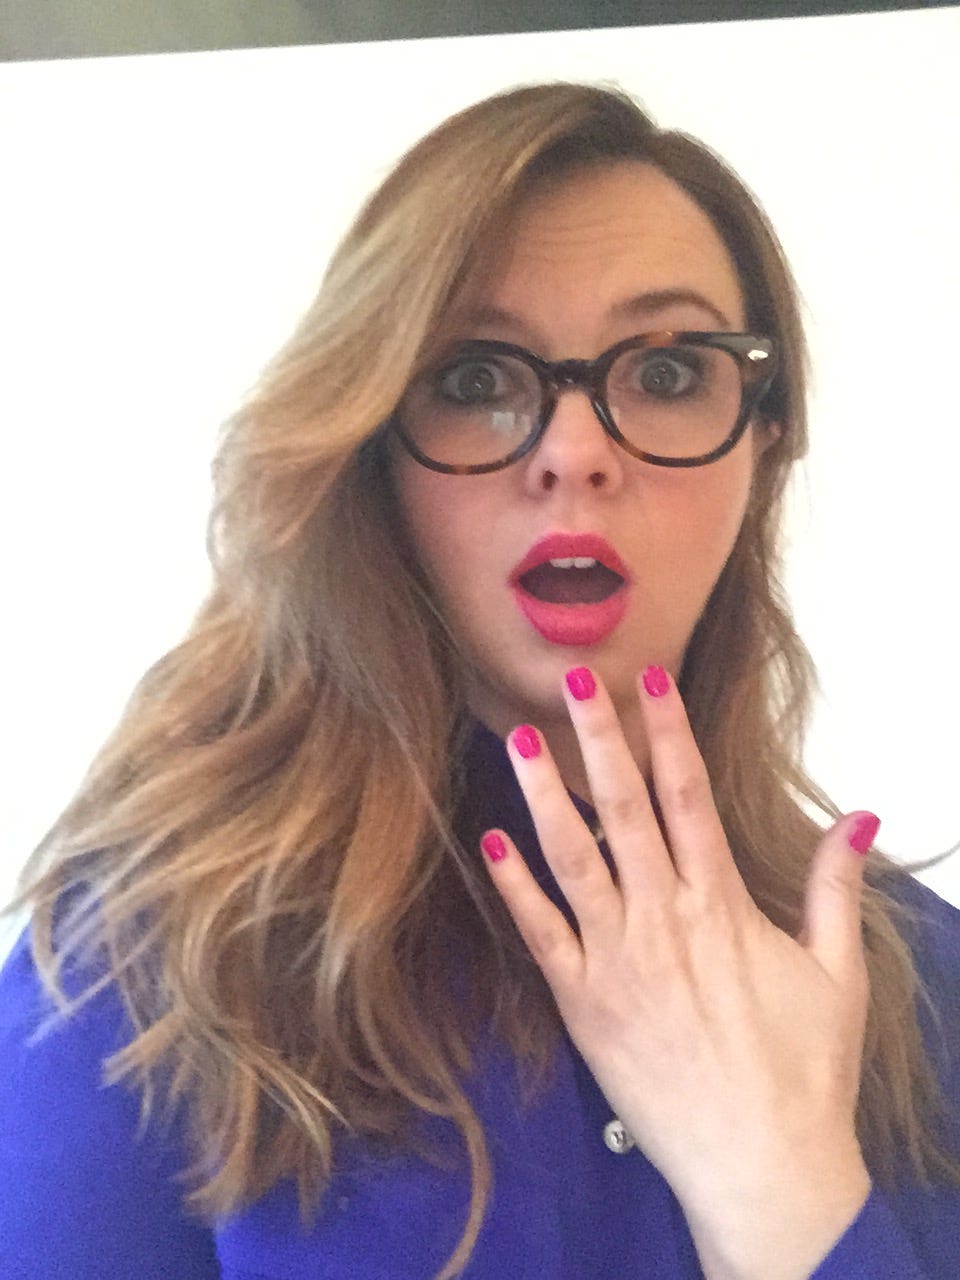 Amber wears reading glasses and holds her hand up to her mouth as if surprised. Her pink nails match her lipstick.